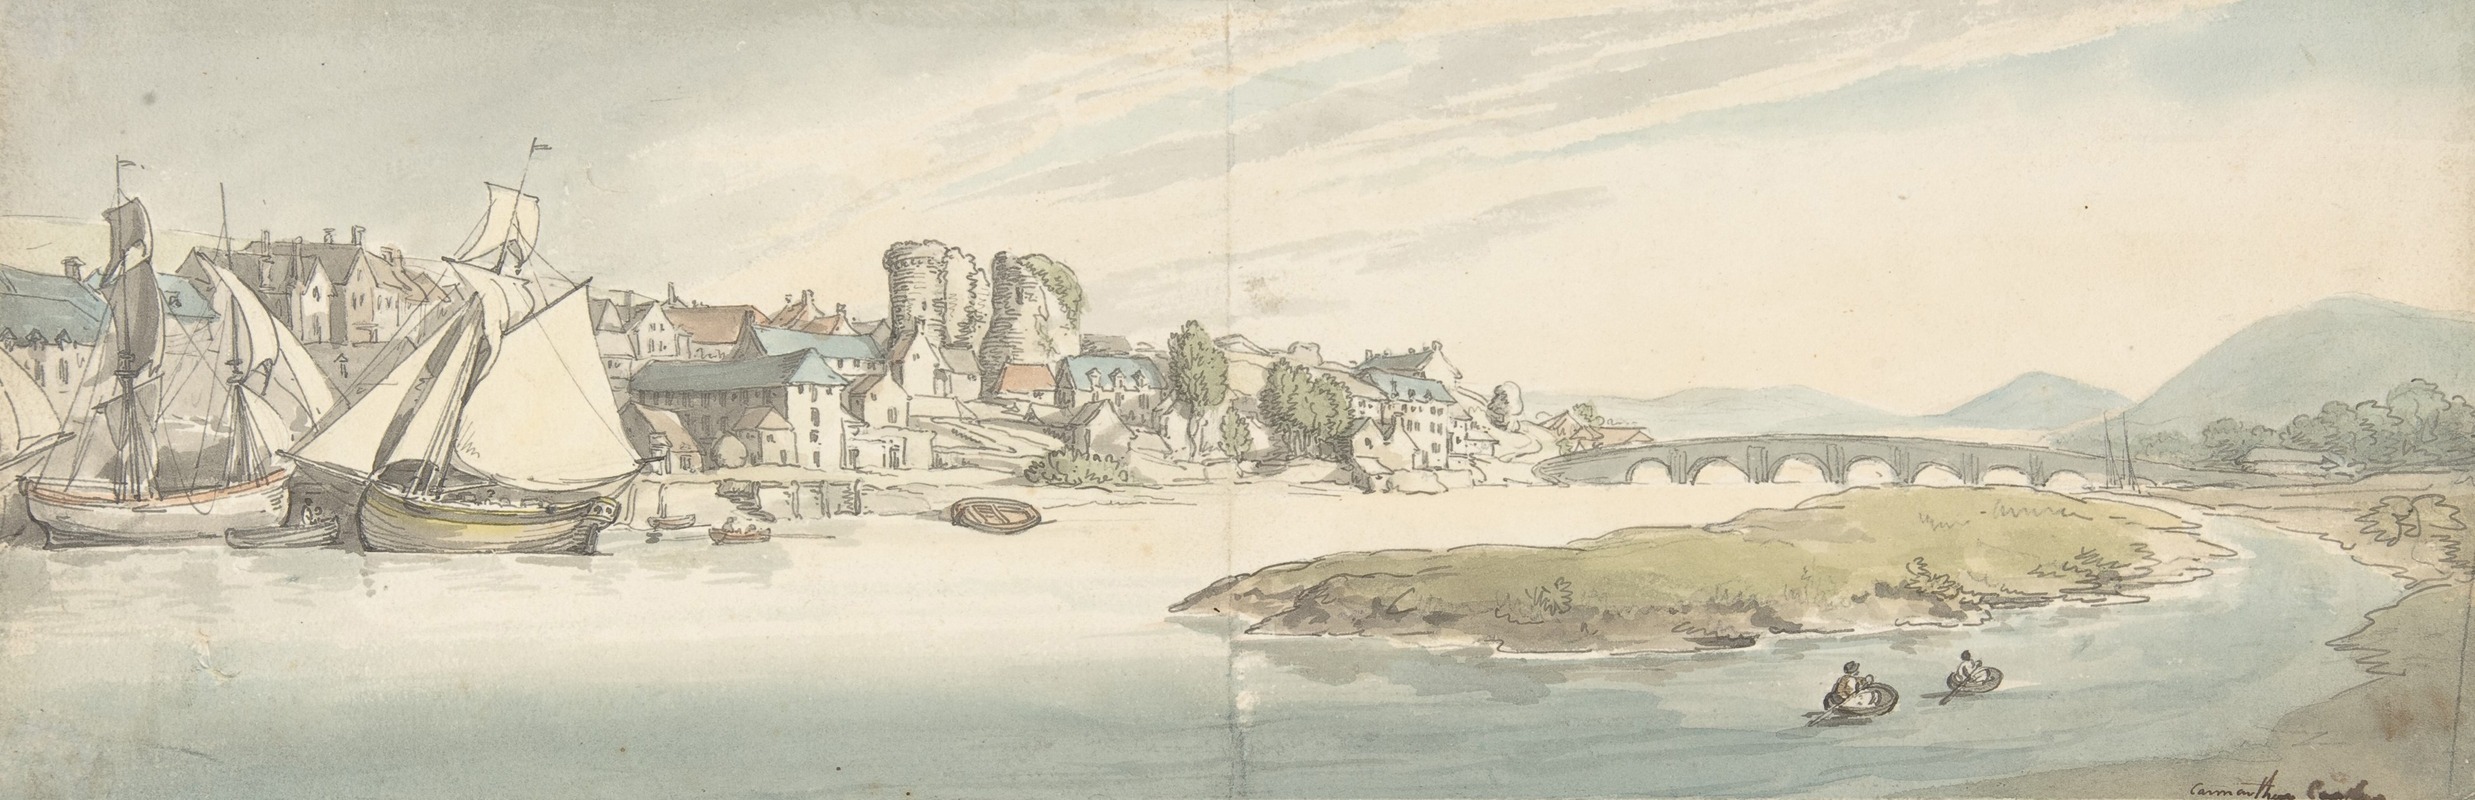 Thomas Rowlandson - View of town on a river (Carwitham Castle)